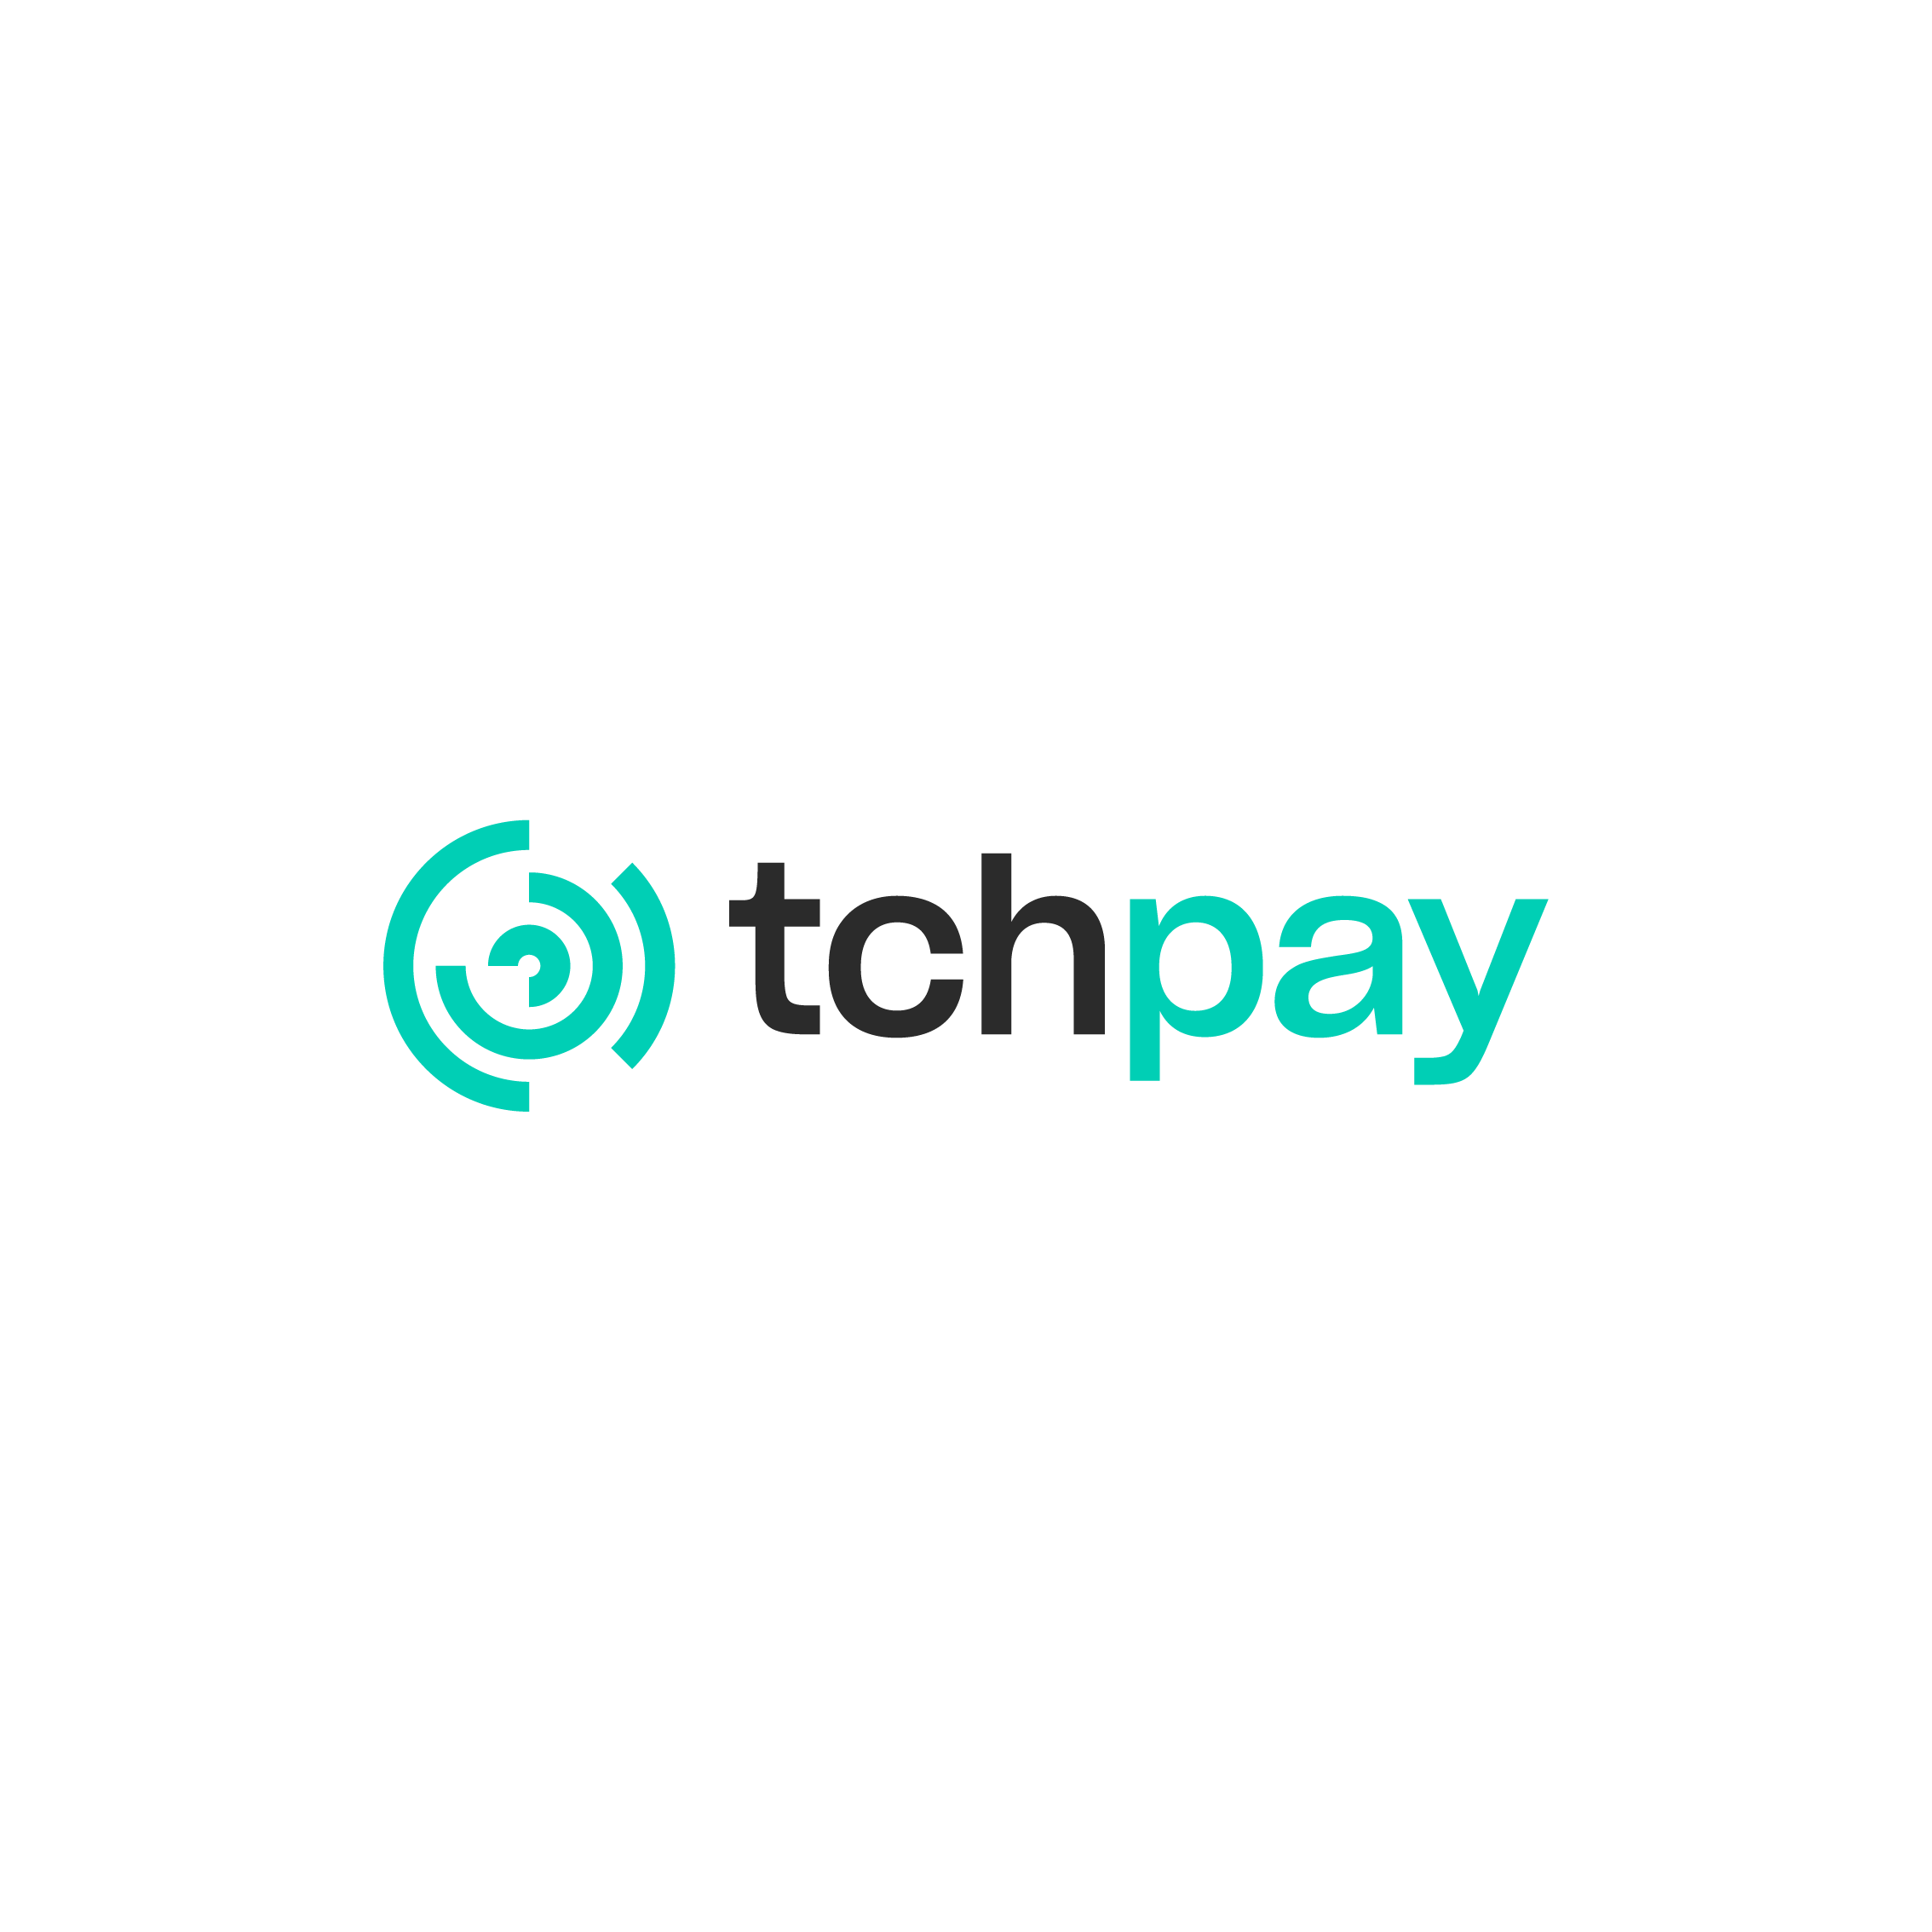 TCHPAY